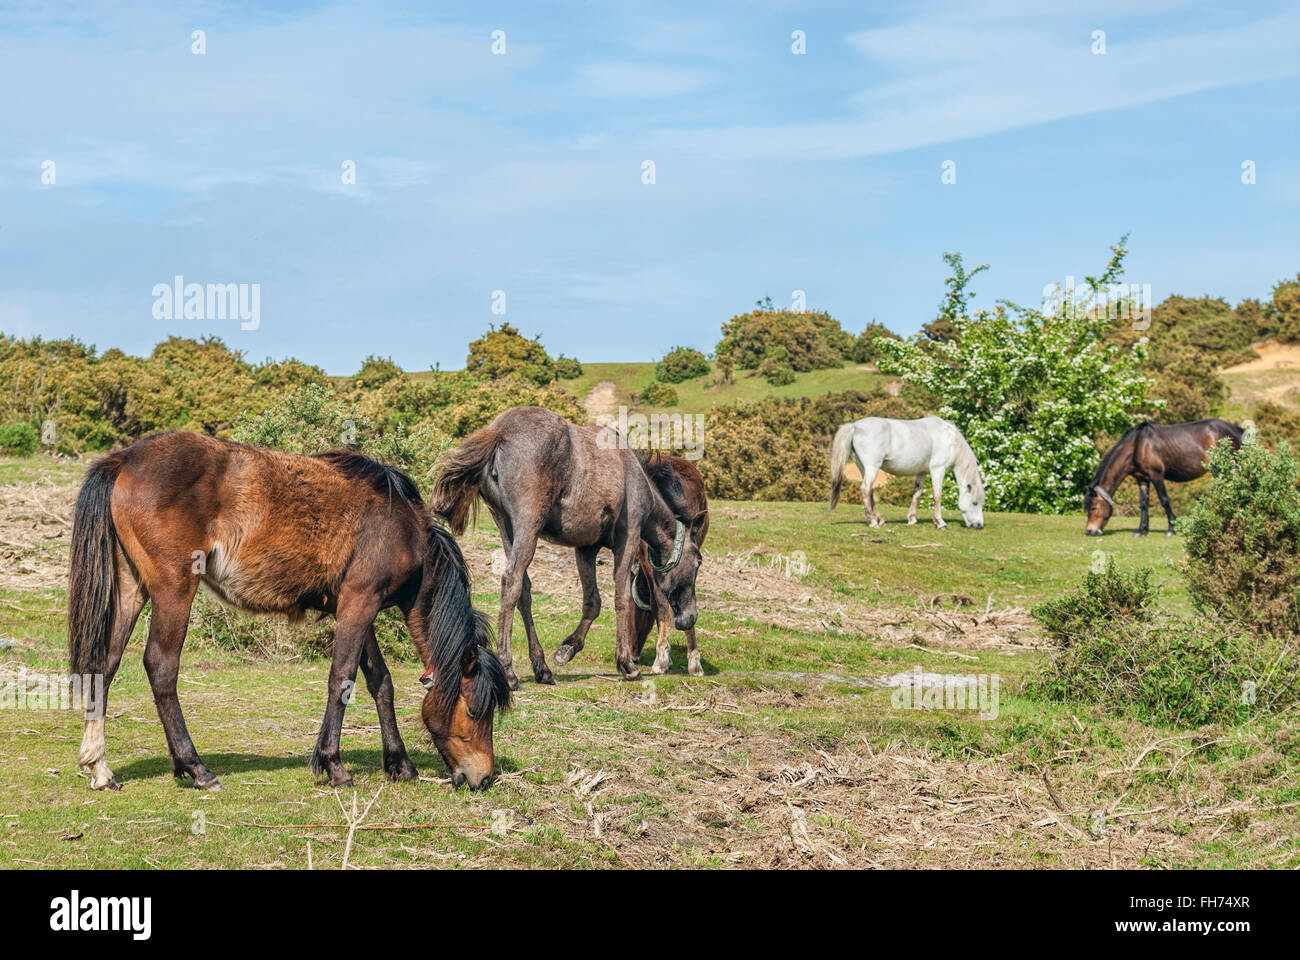 Half Wild New Forest Ponies at the New Forest Wildlife Park near Lyndhurst, South East England. Stock Photo